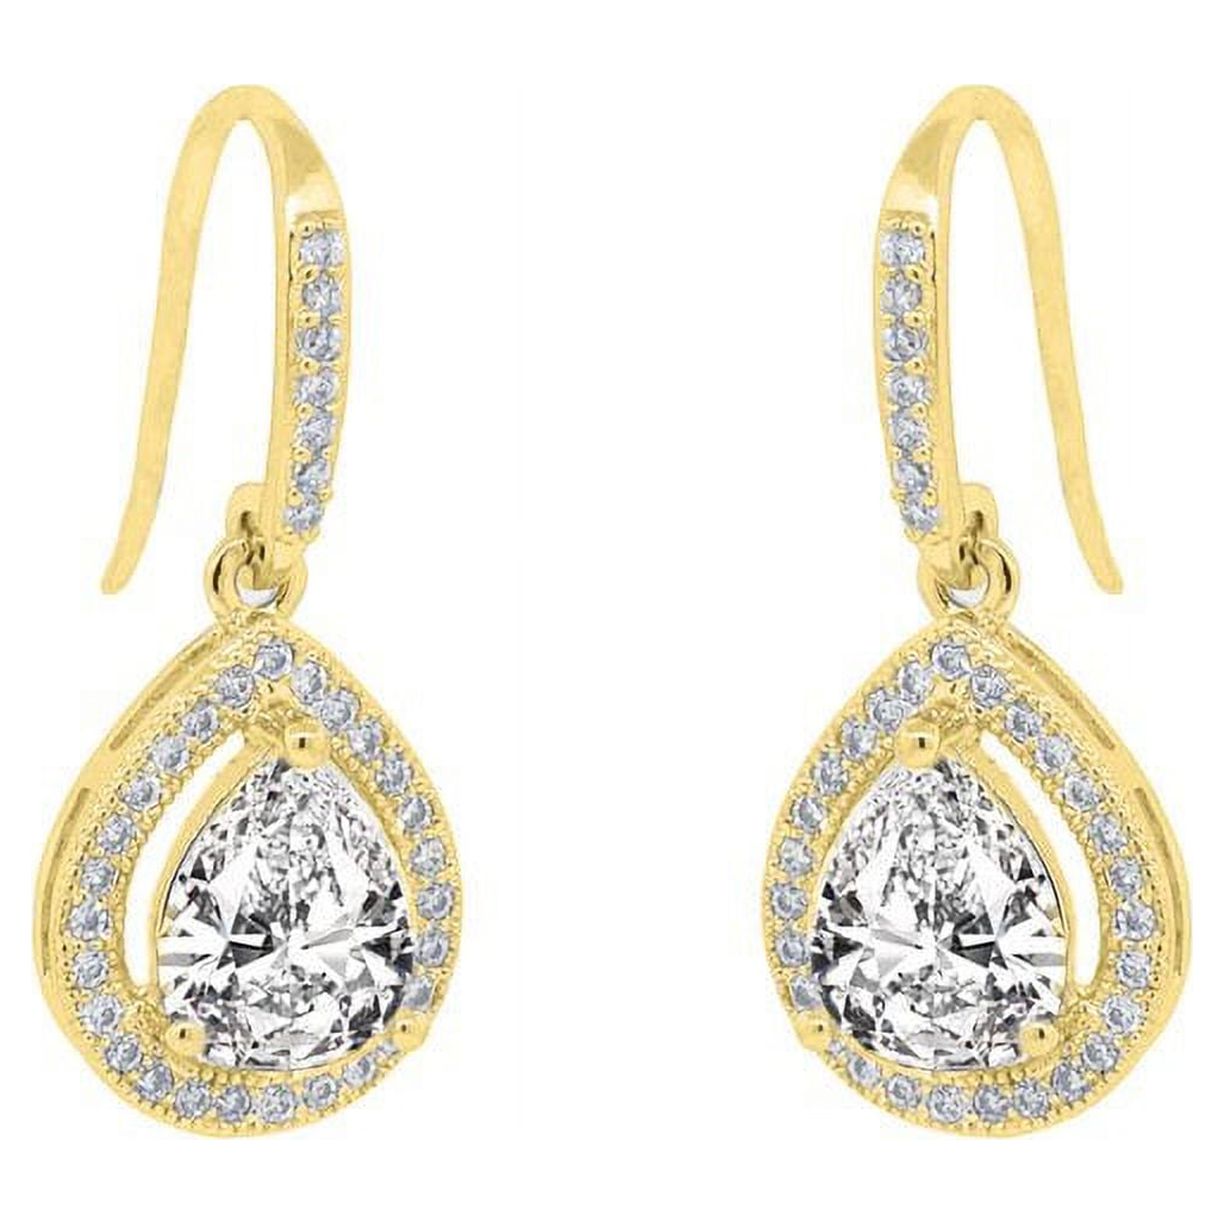 Cate & Chloe Isabel 18k Yellow Gold Plated Drop Dangle Earrings | CZ Crystal Jewelry for Women, Gift for Her - image 1 of 8